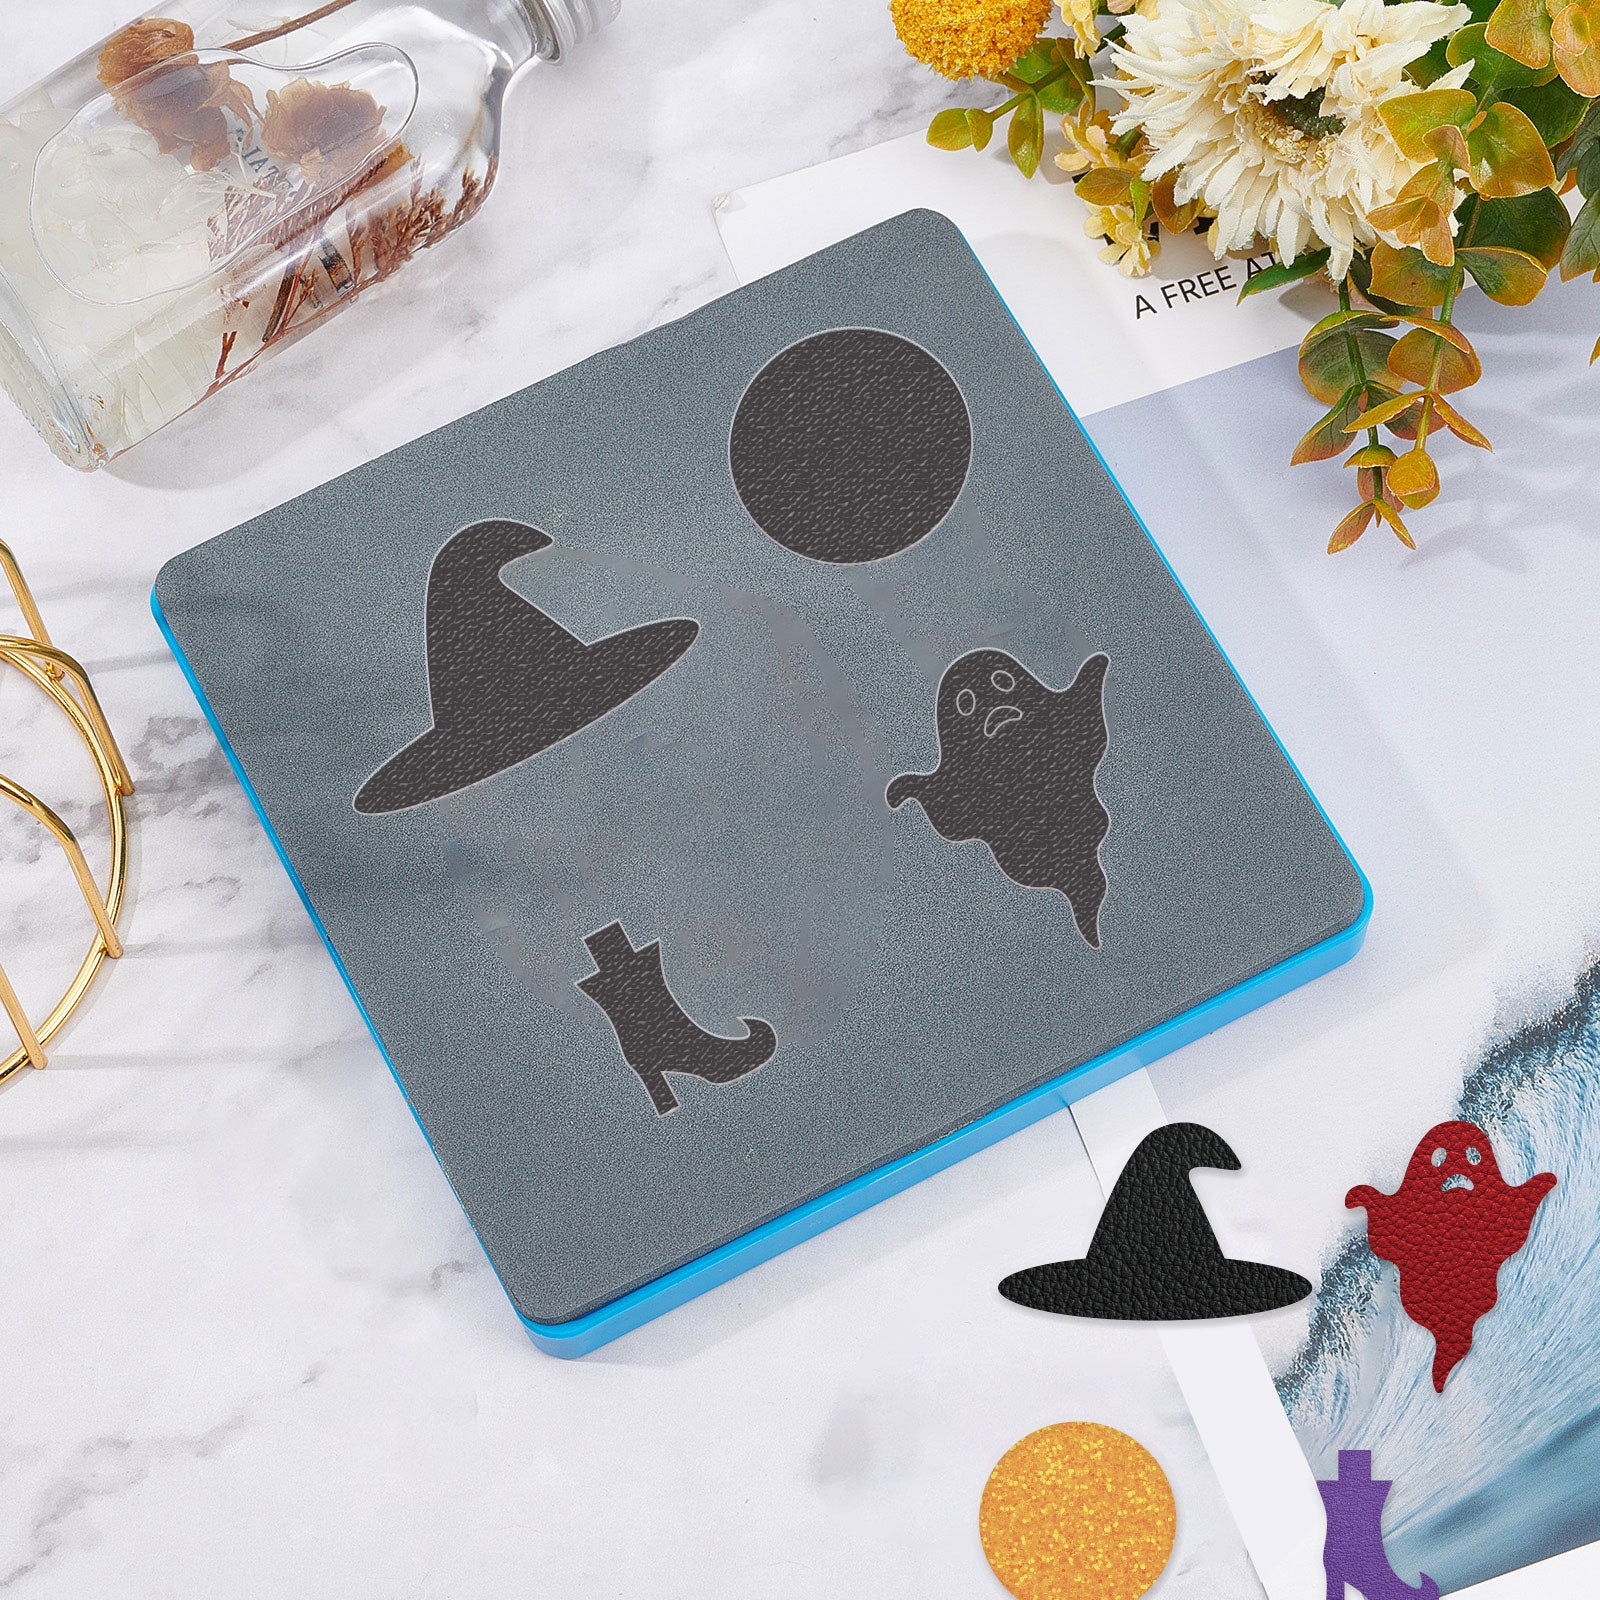 Globleland Leather Die Cutting Ghost, Hat, Boots Pattern Earring Cutting Dies Stencil Embossing Craft Decor Leather Mold Template Plastic Injection Mold for DIY Paper Card